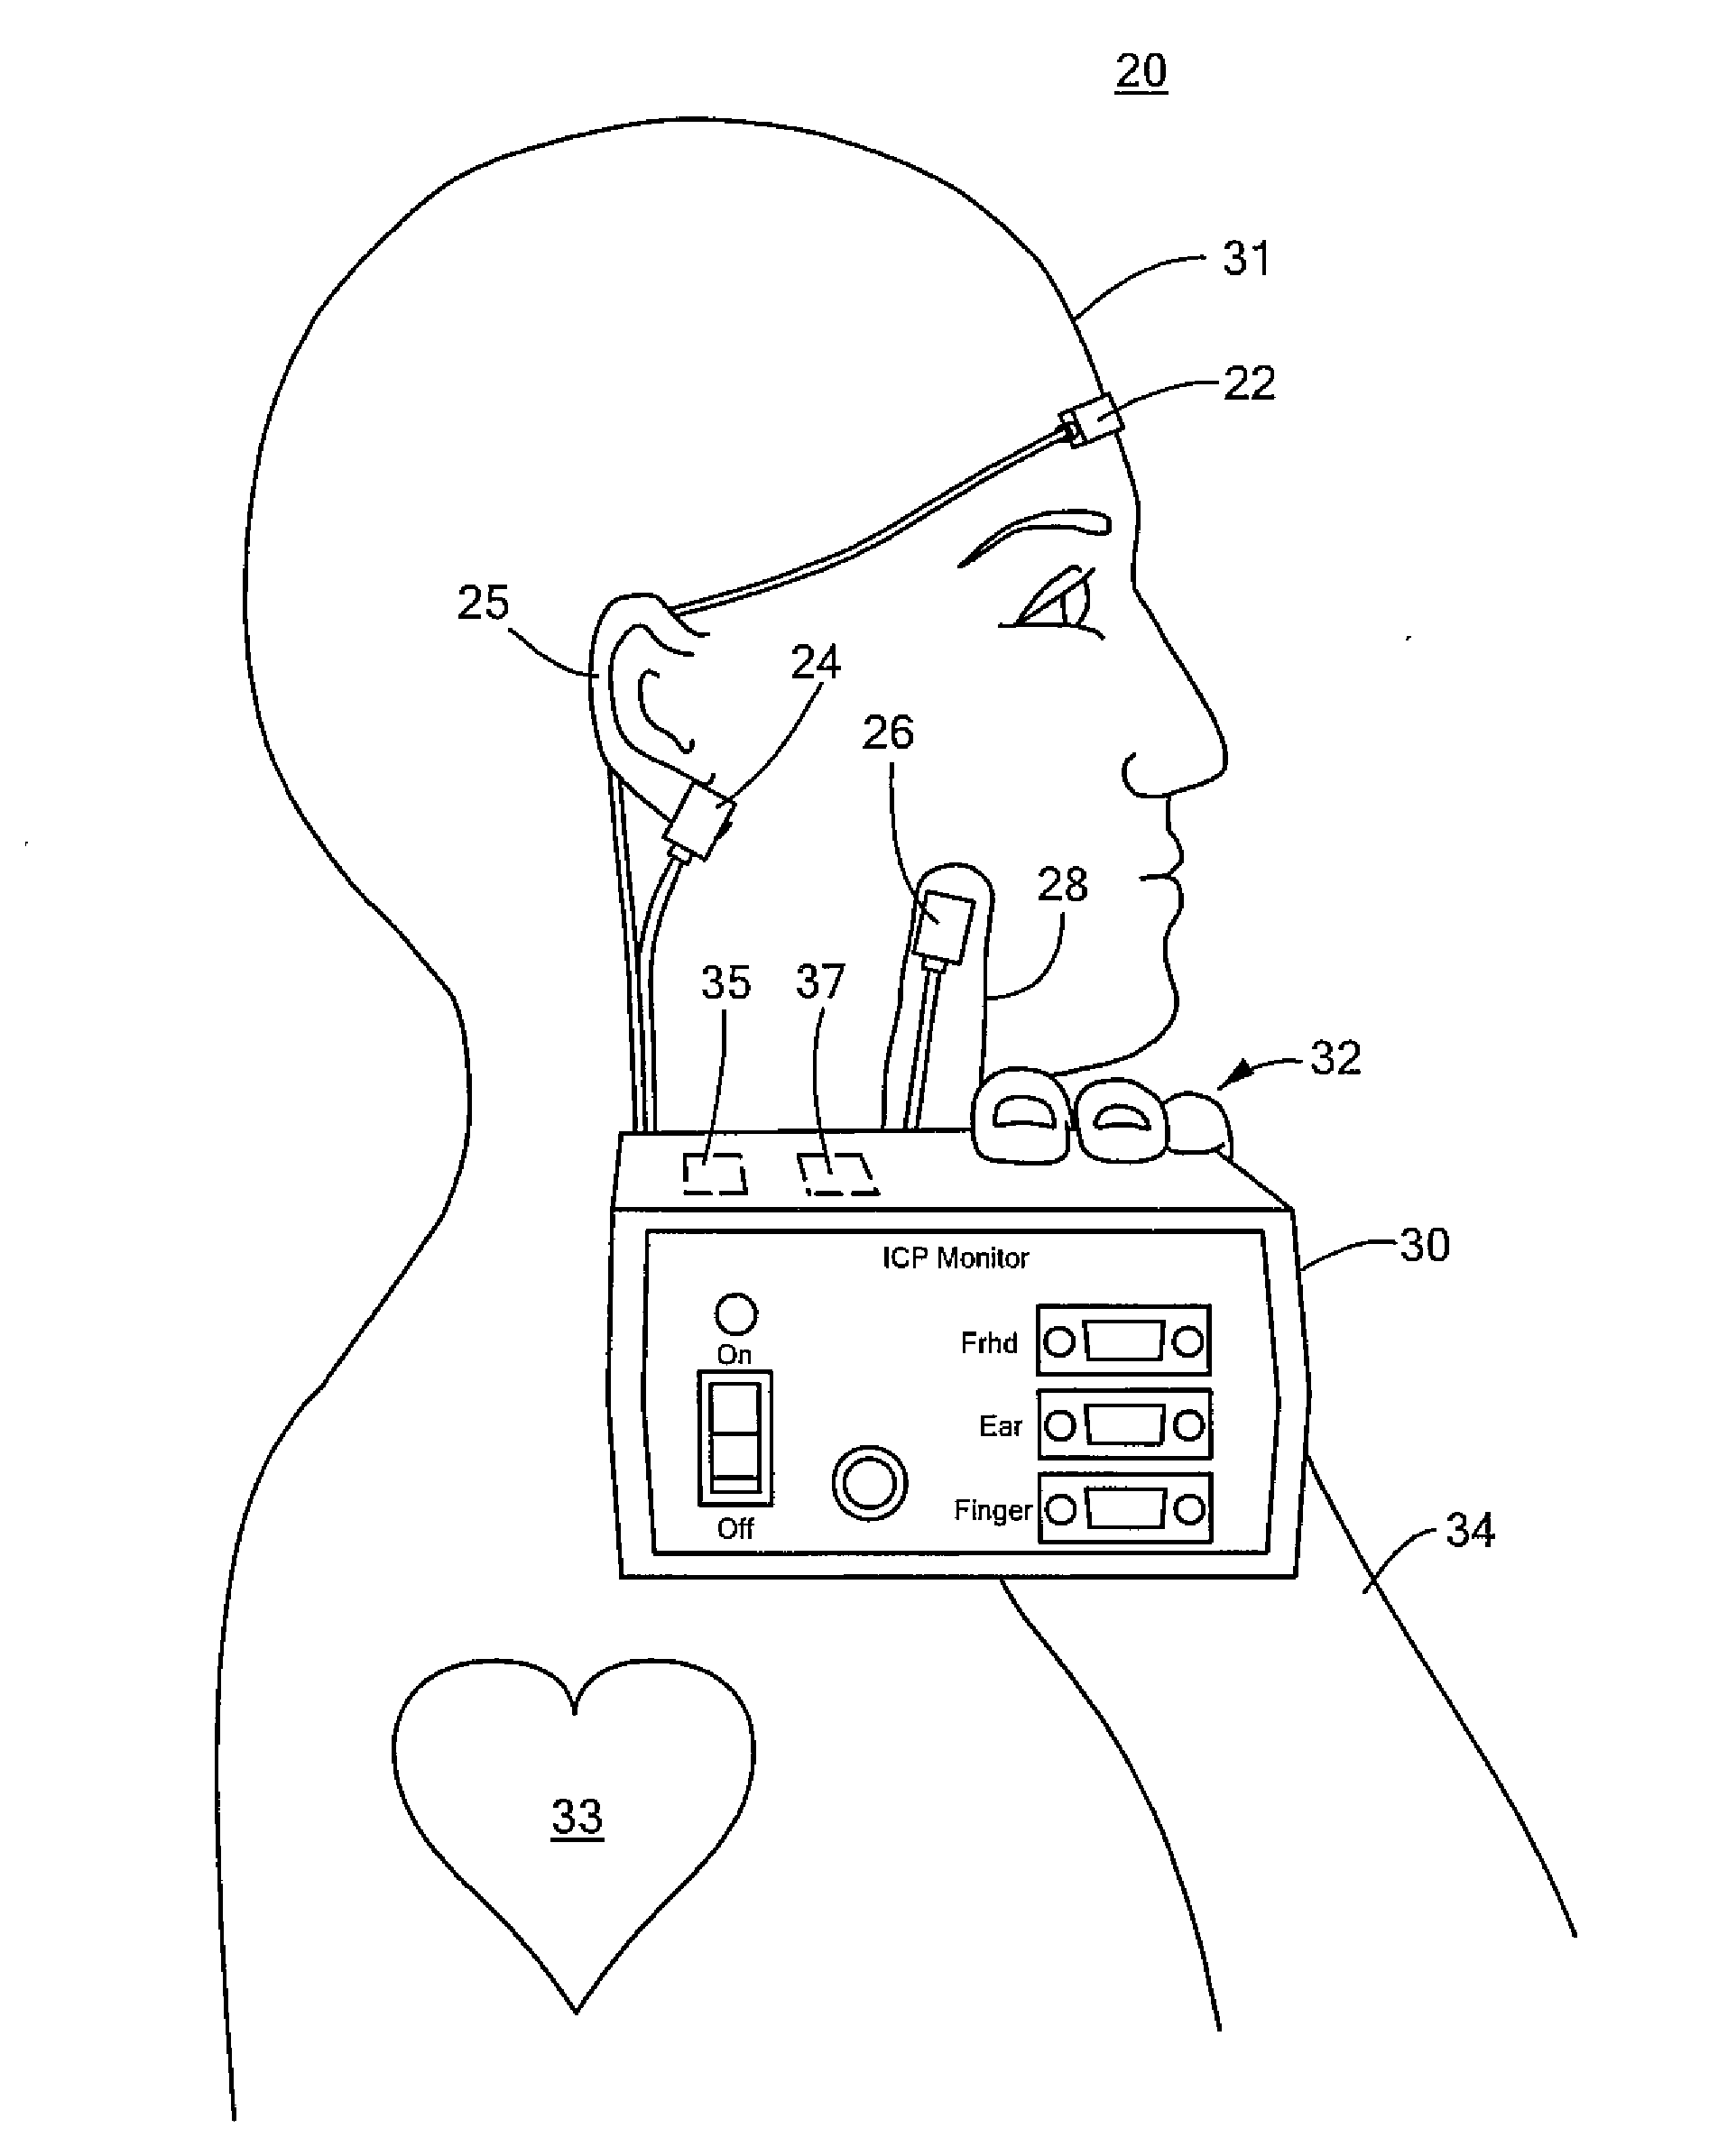 Non-invasive intracranial pressure monitoring system and method thereof